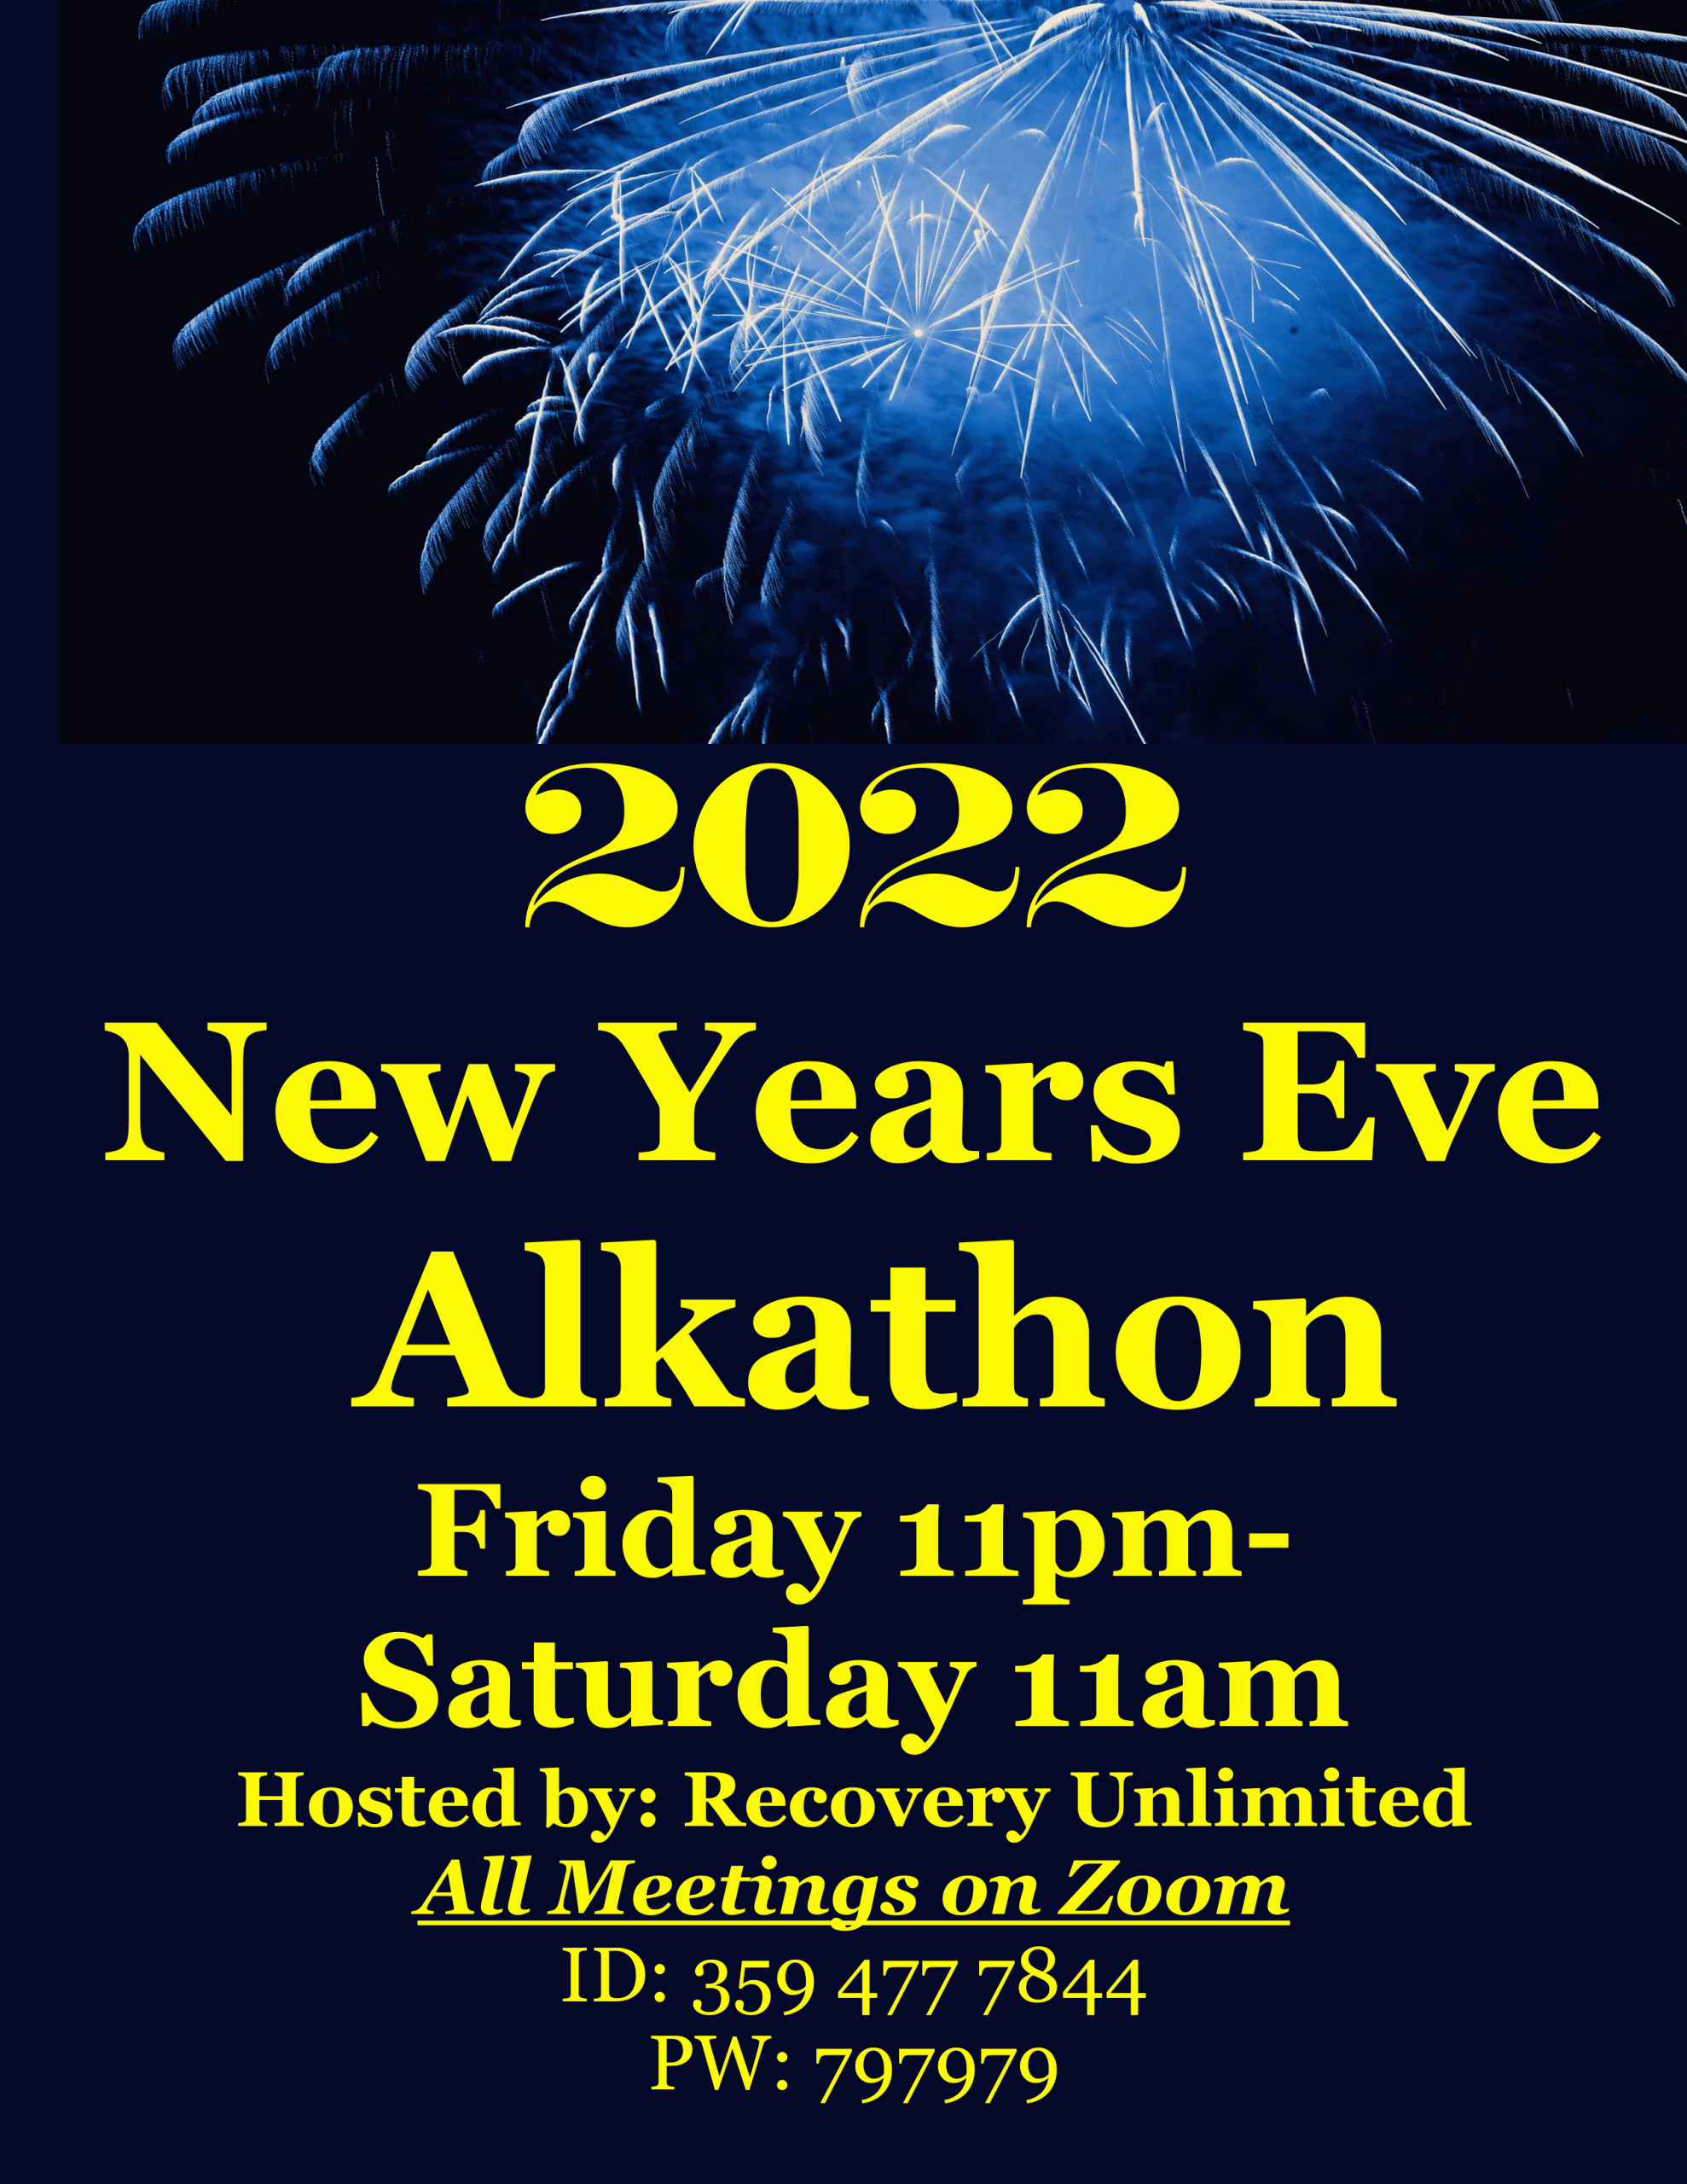 2022 New Years Eve Alkathon on Zoom